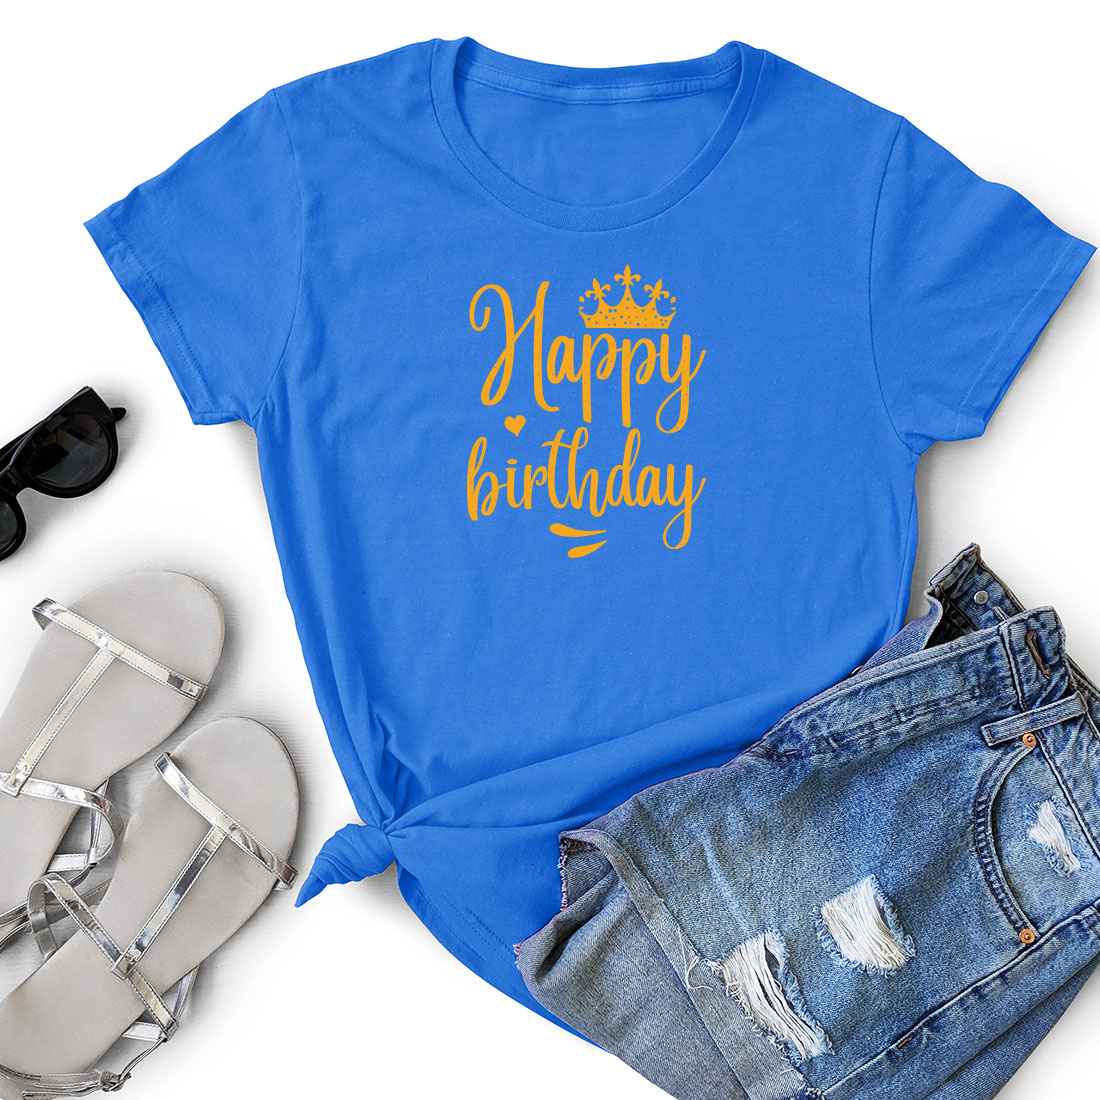 T - shirt that says happy birthday with a crown on it.